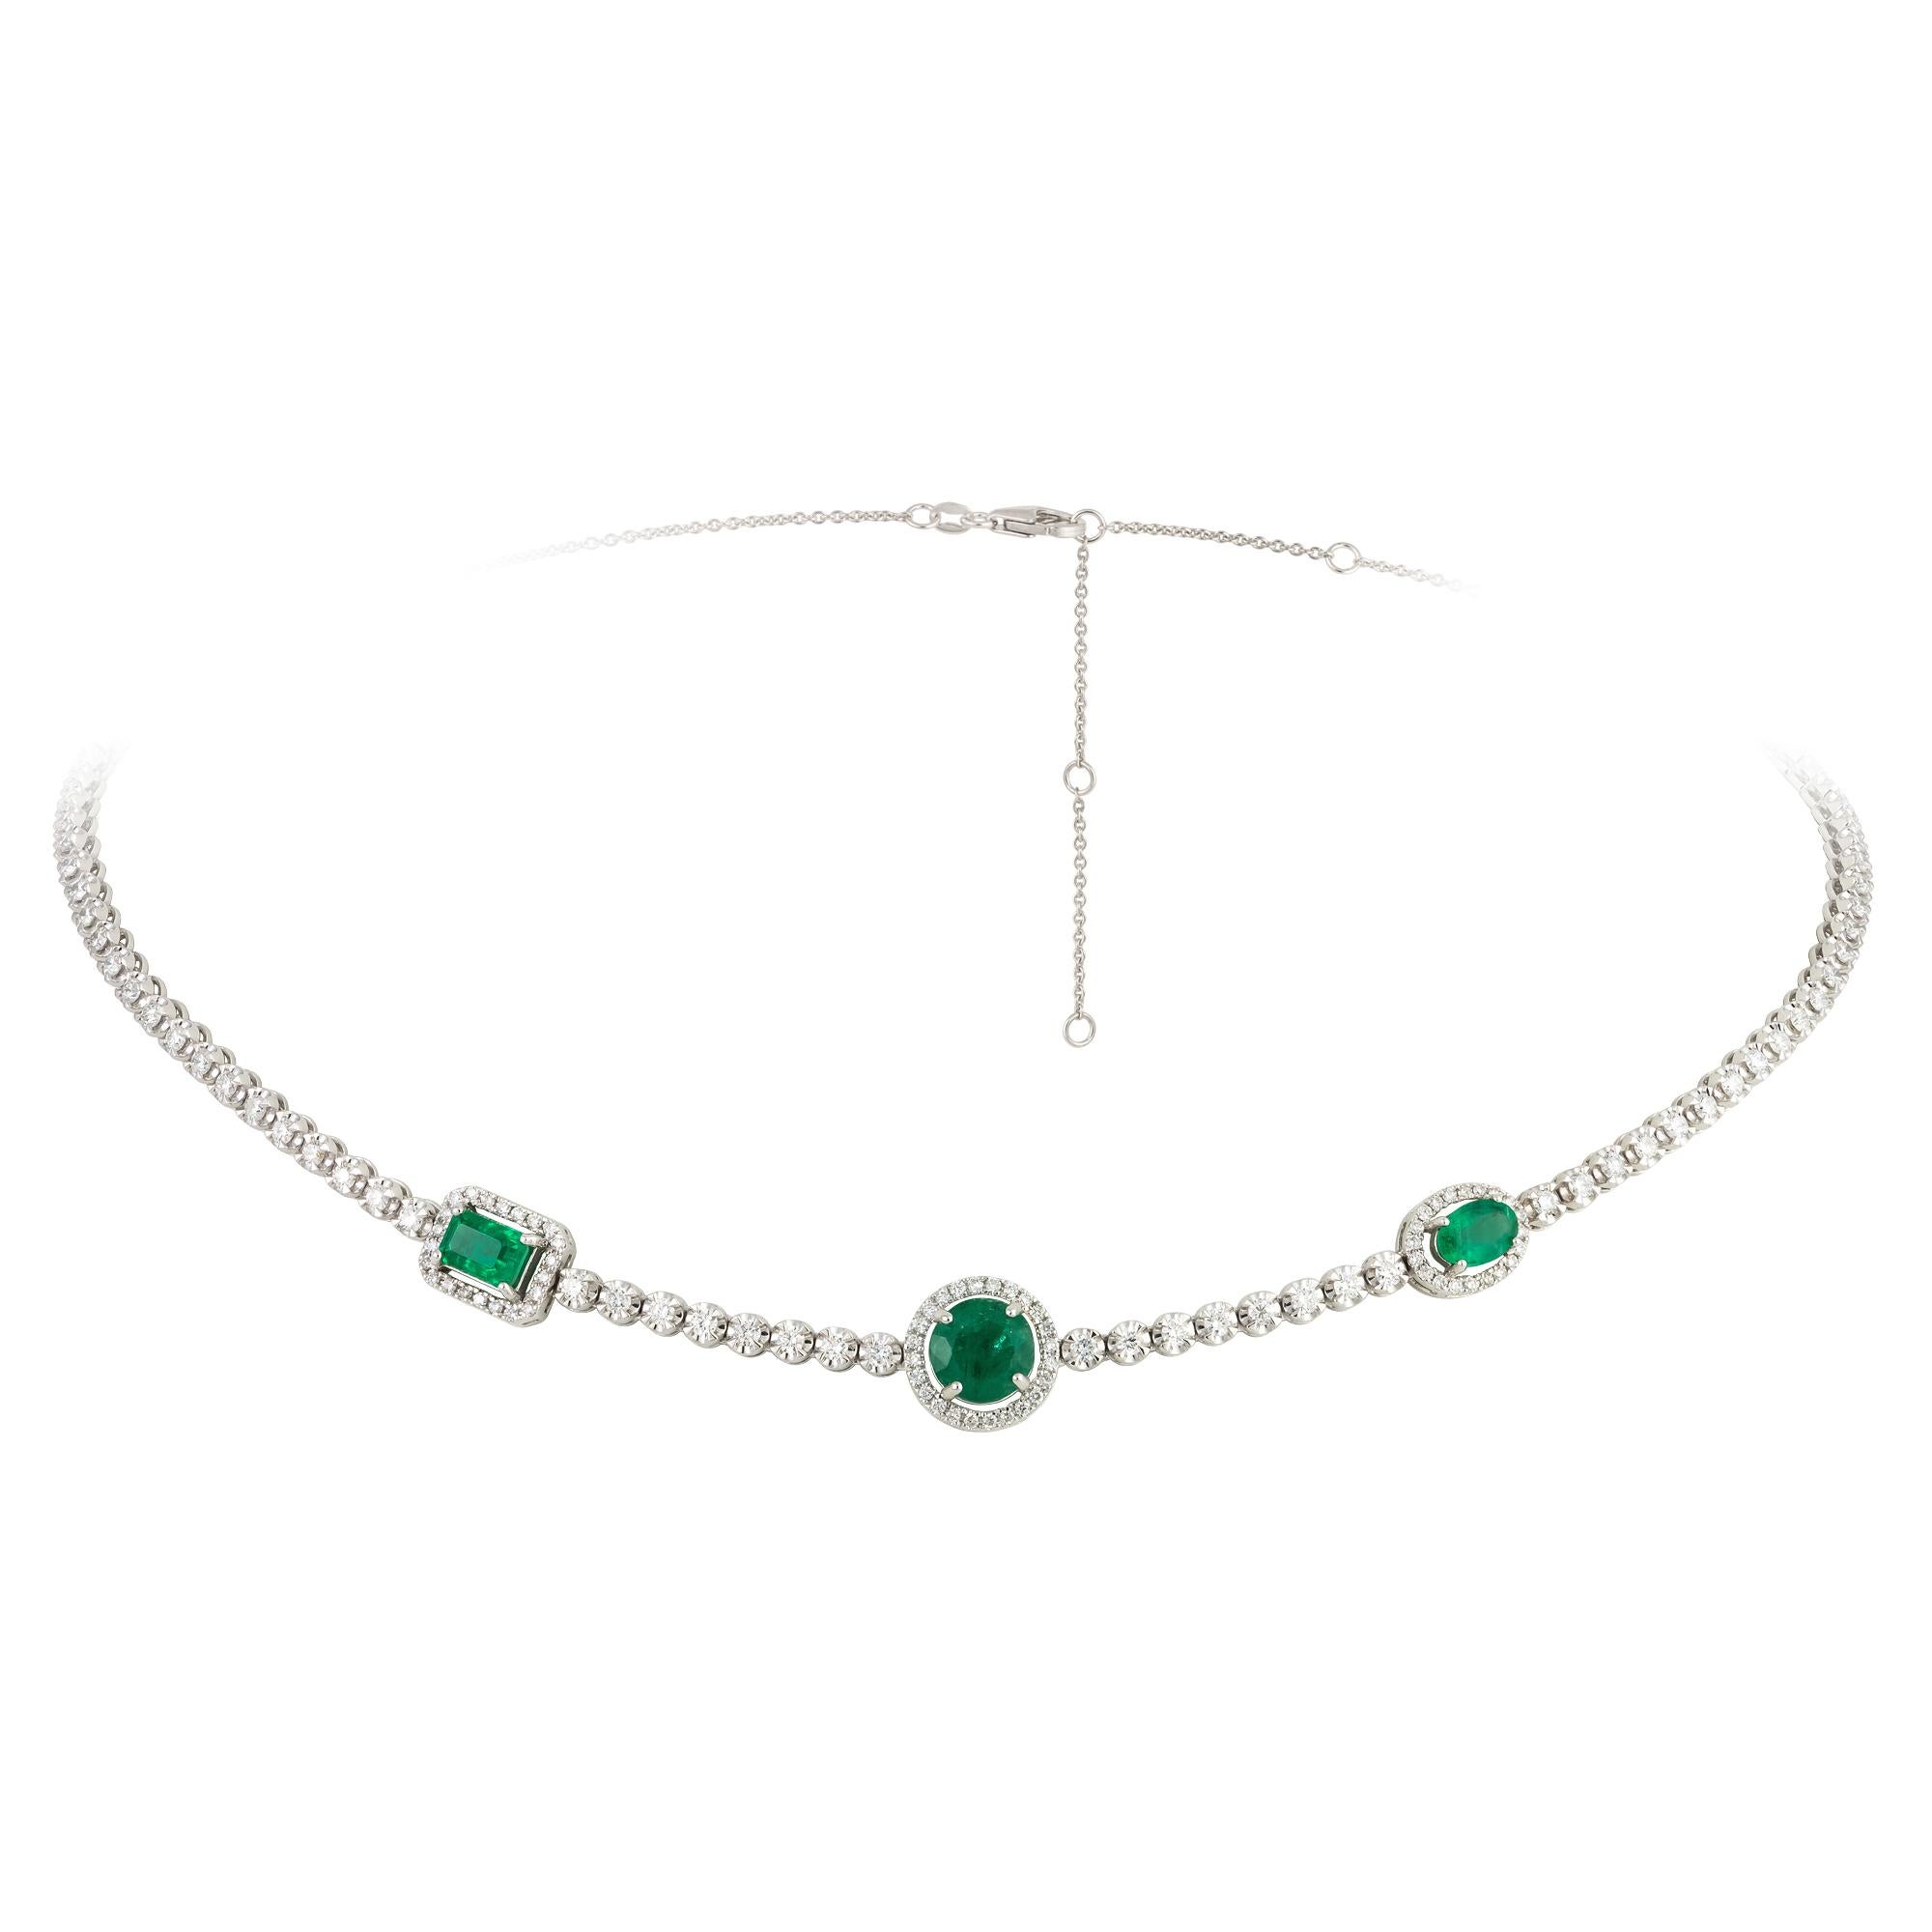 Choker White Gold 18K Necklace Emerald Diamond For Her In New Condition For Sale In Montreux, CH